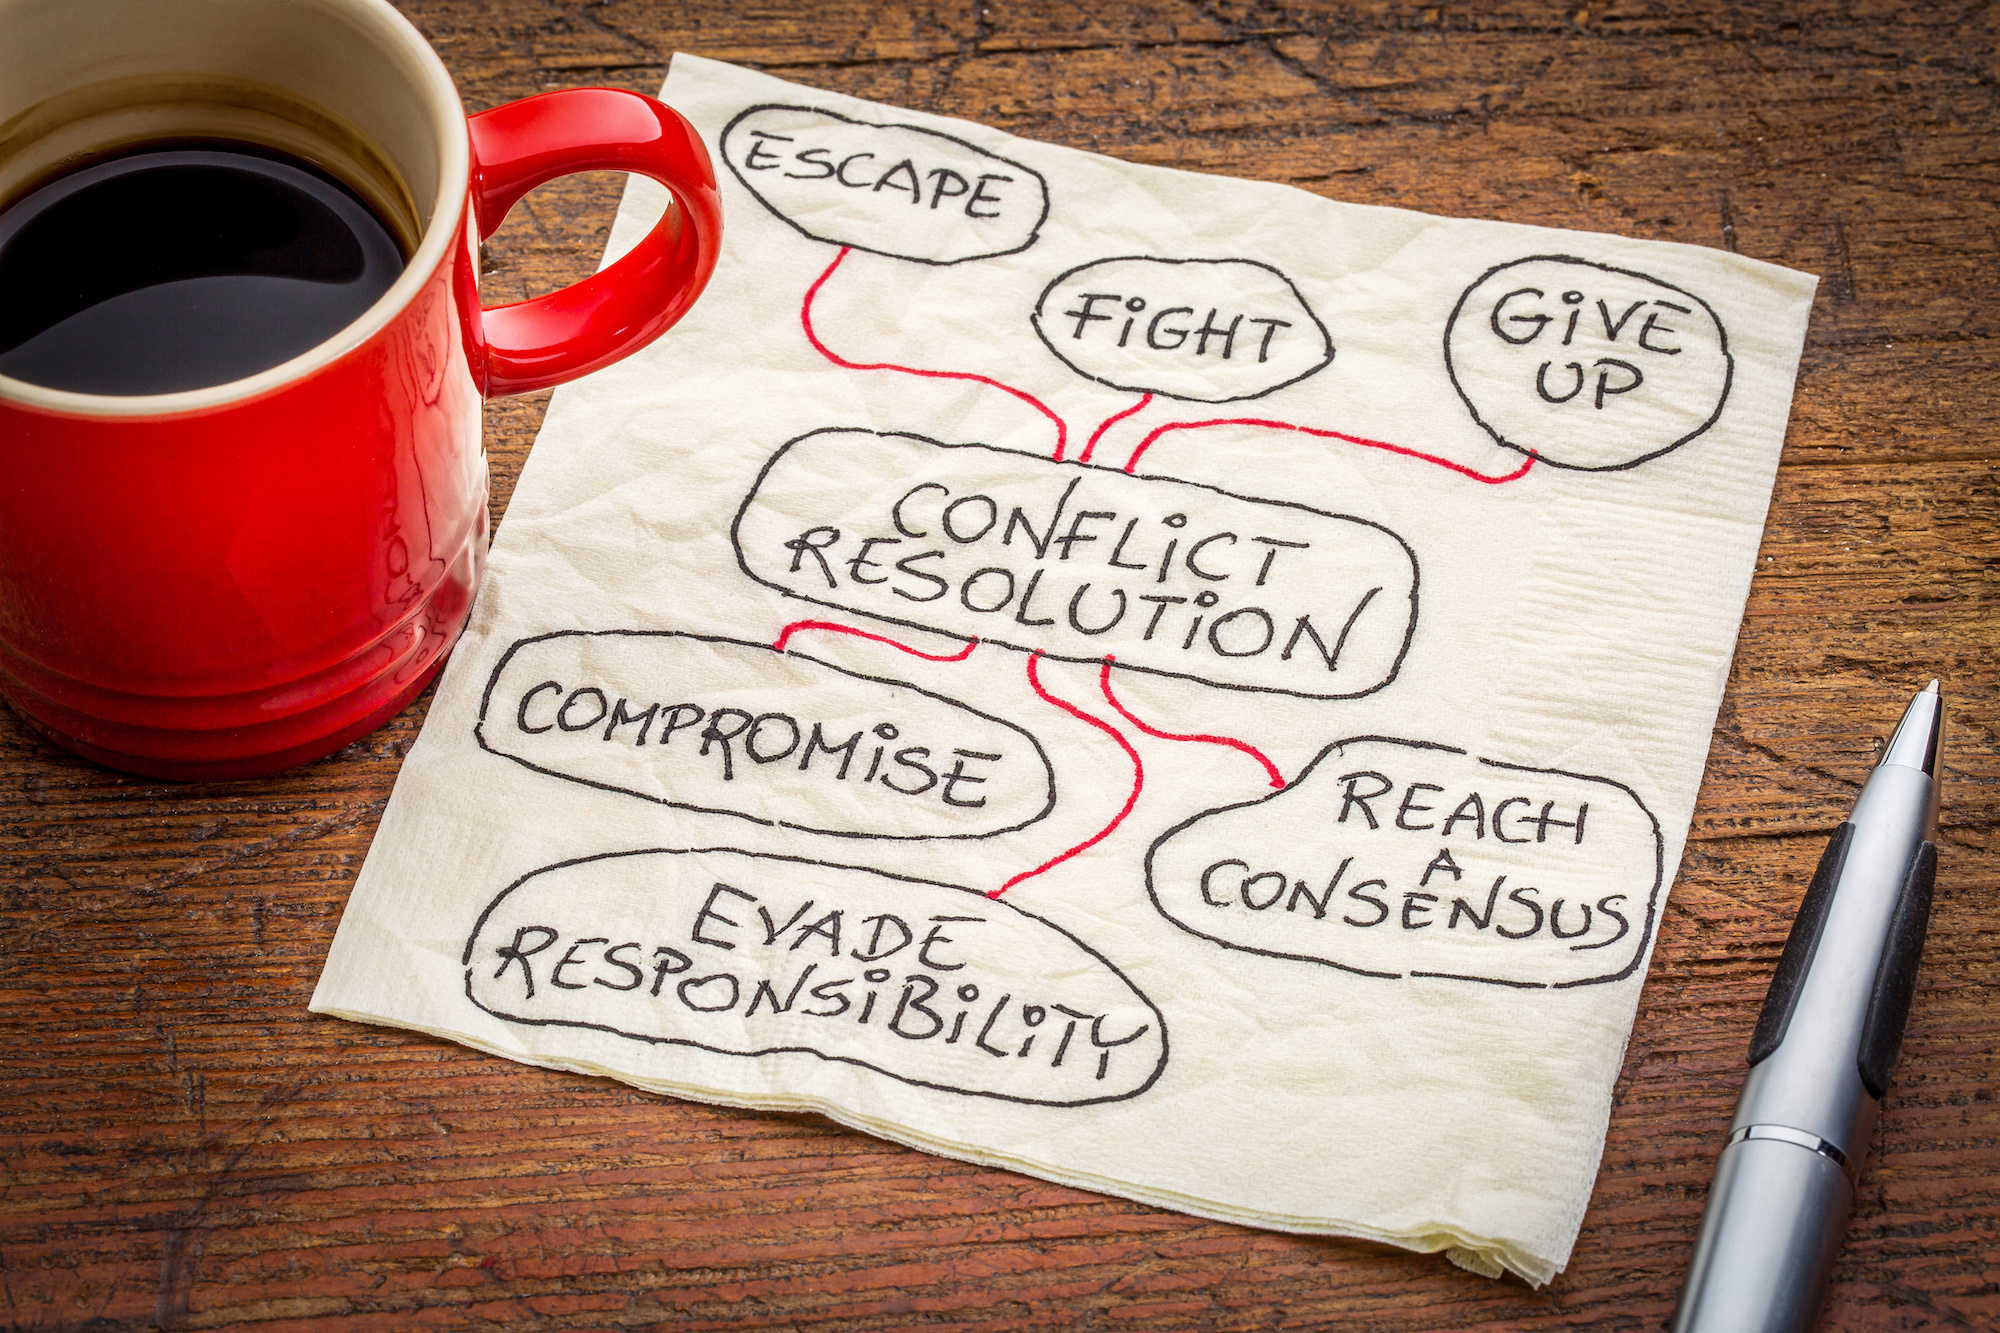 List of conflict resolution skills written on a napkin next to a cup of coffee.